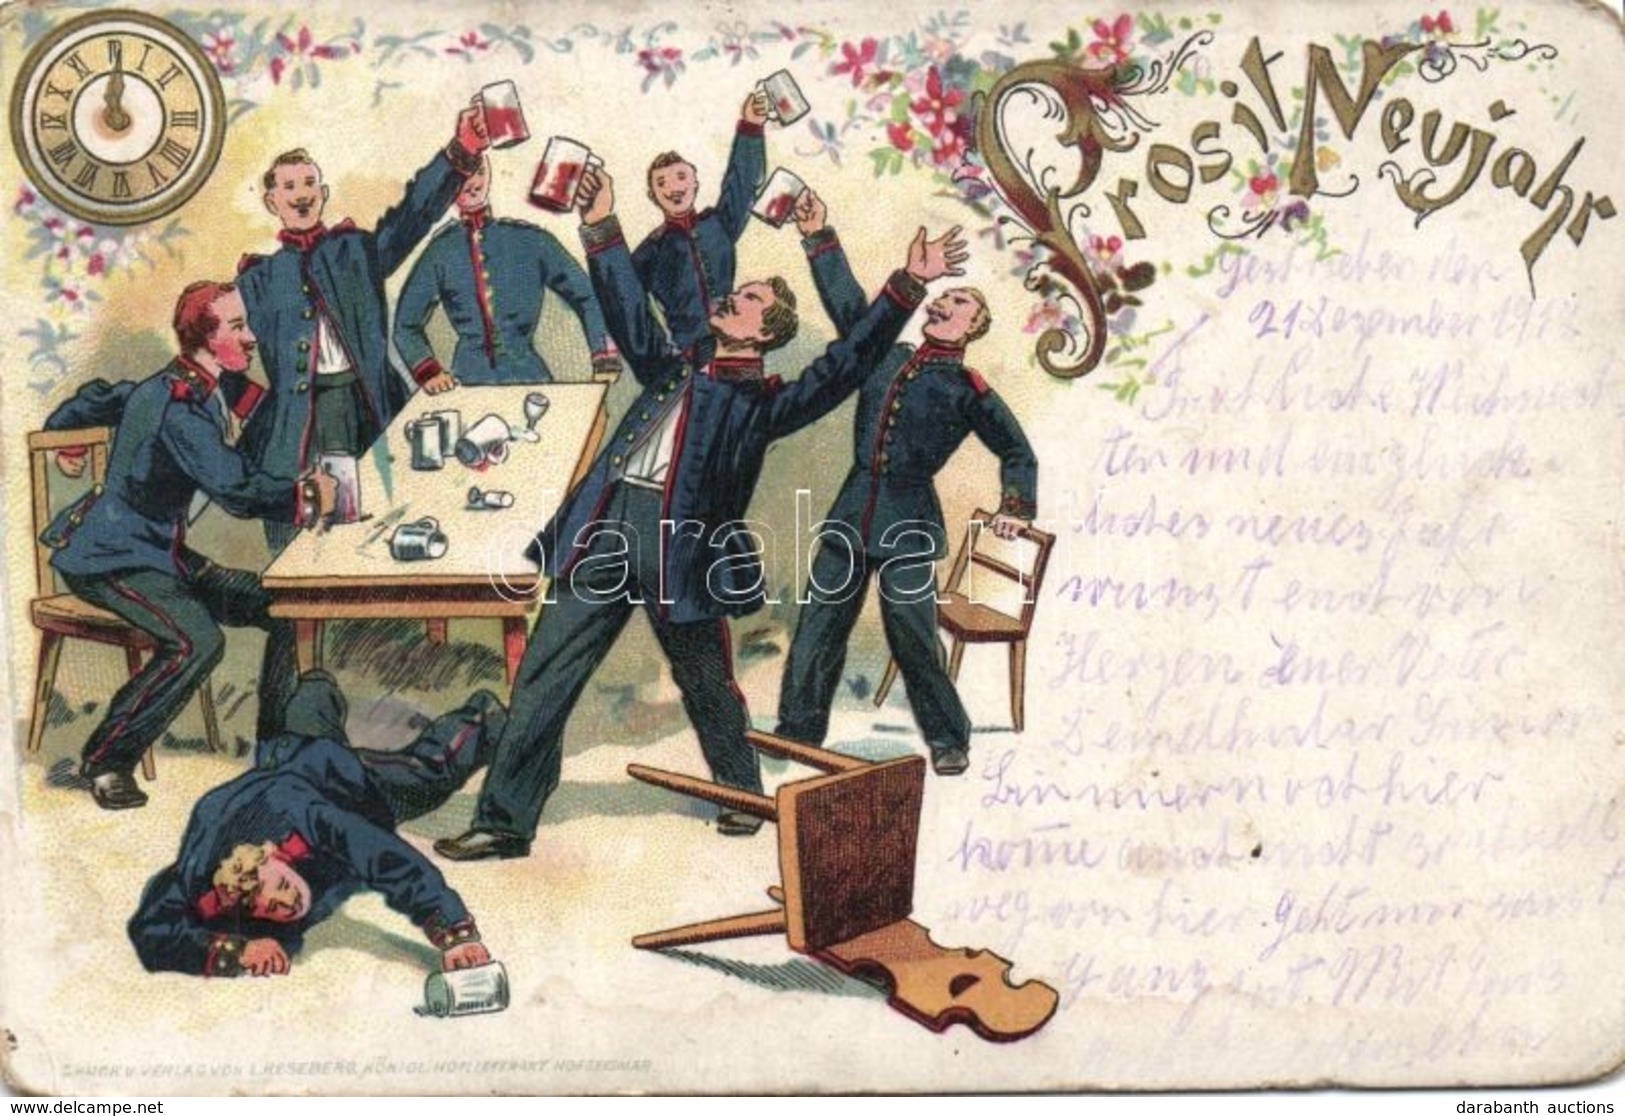 T2/T3 Prosit Neujahr / German Military New Year Greeting Art Postcard With Drunk Soldiers. Floral Litho L. Keseberg (wor - Non Classificati